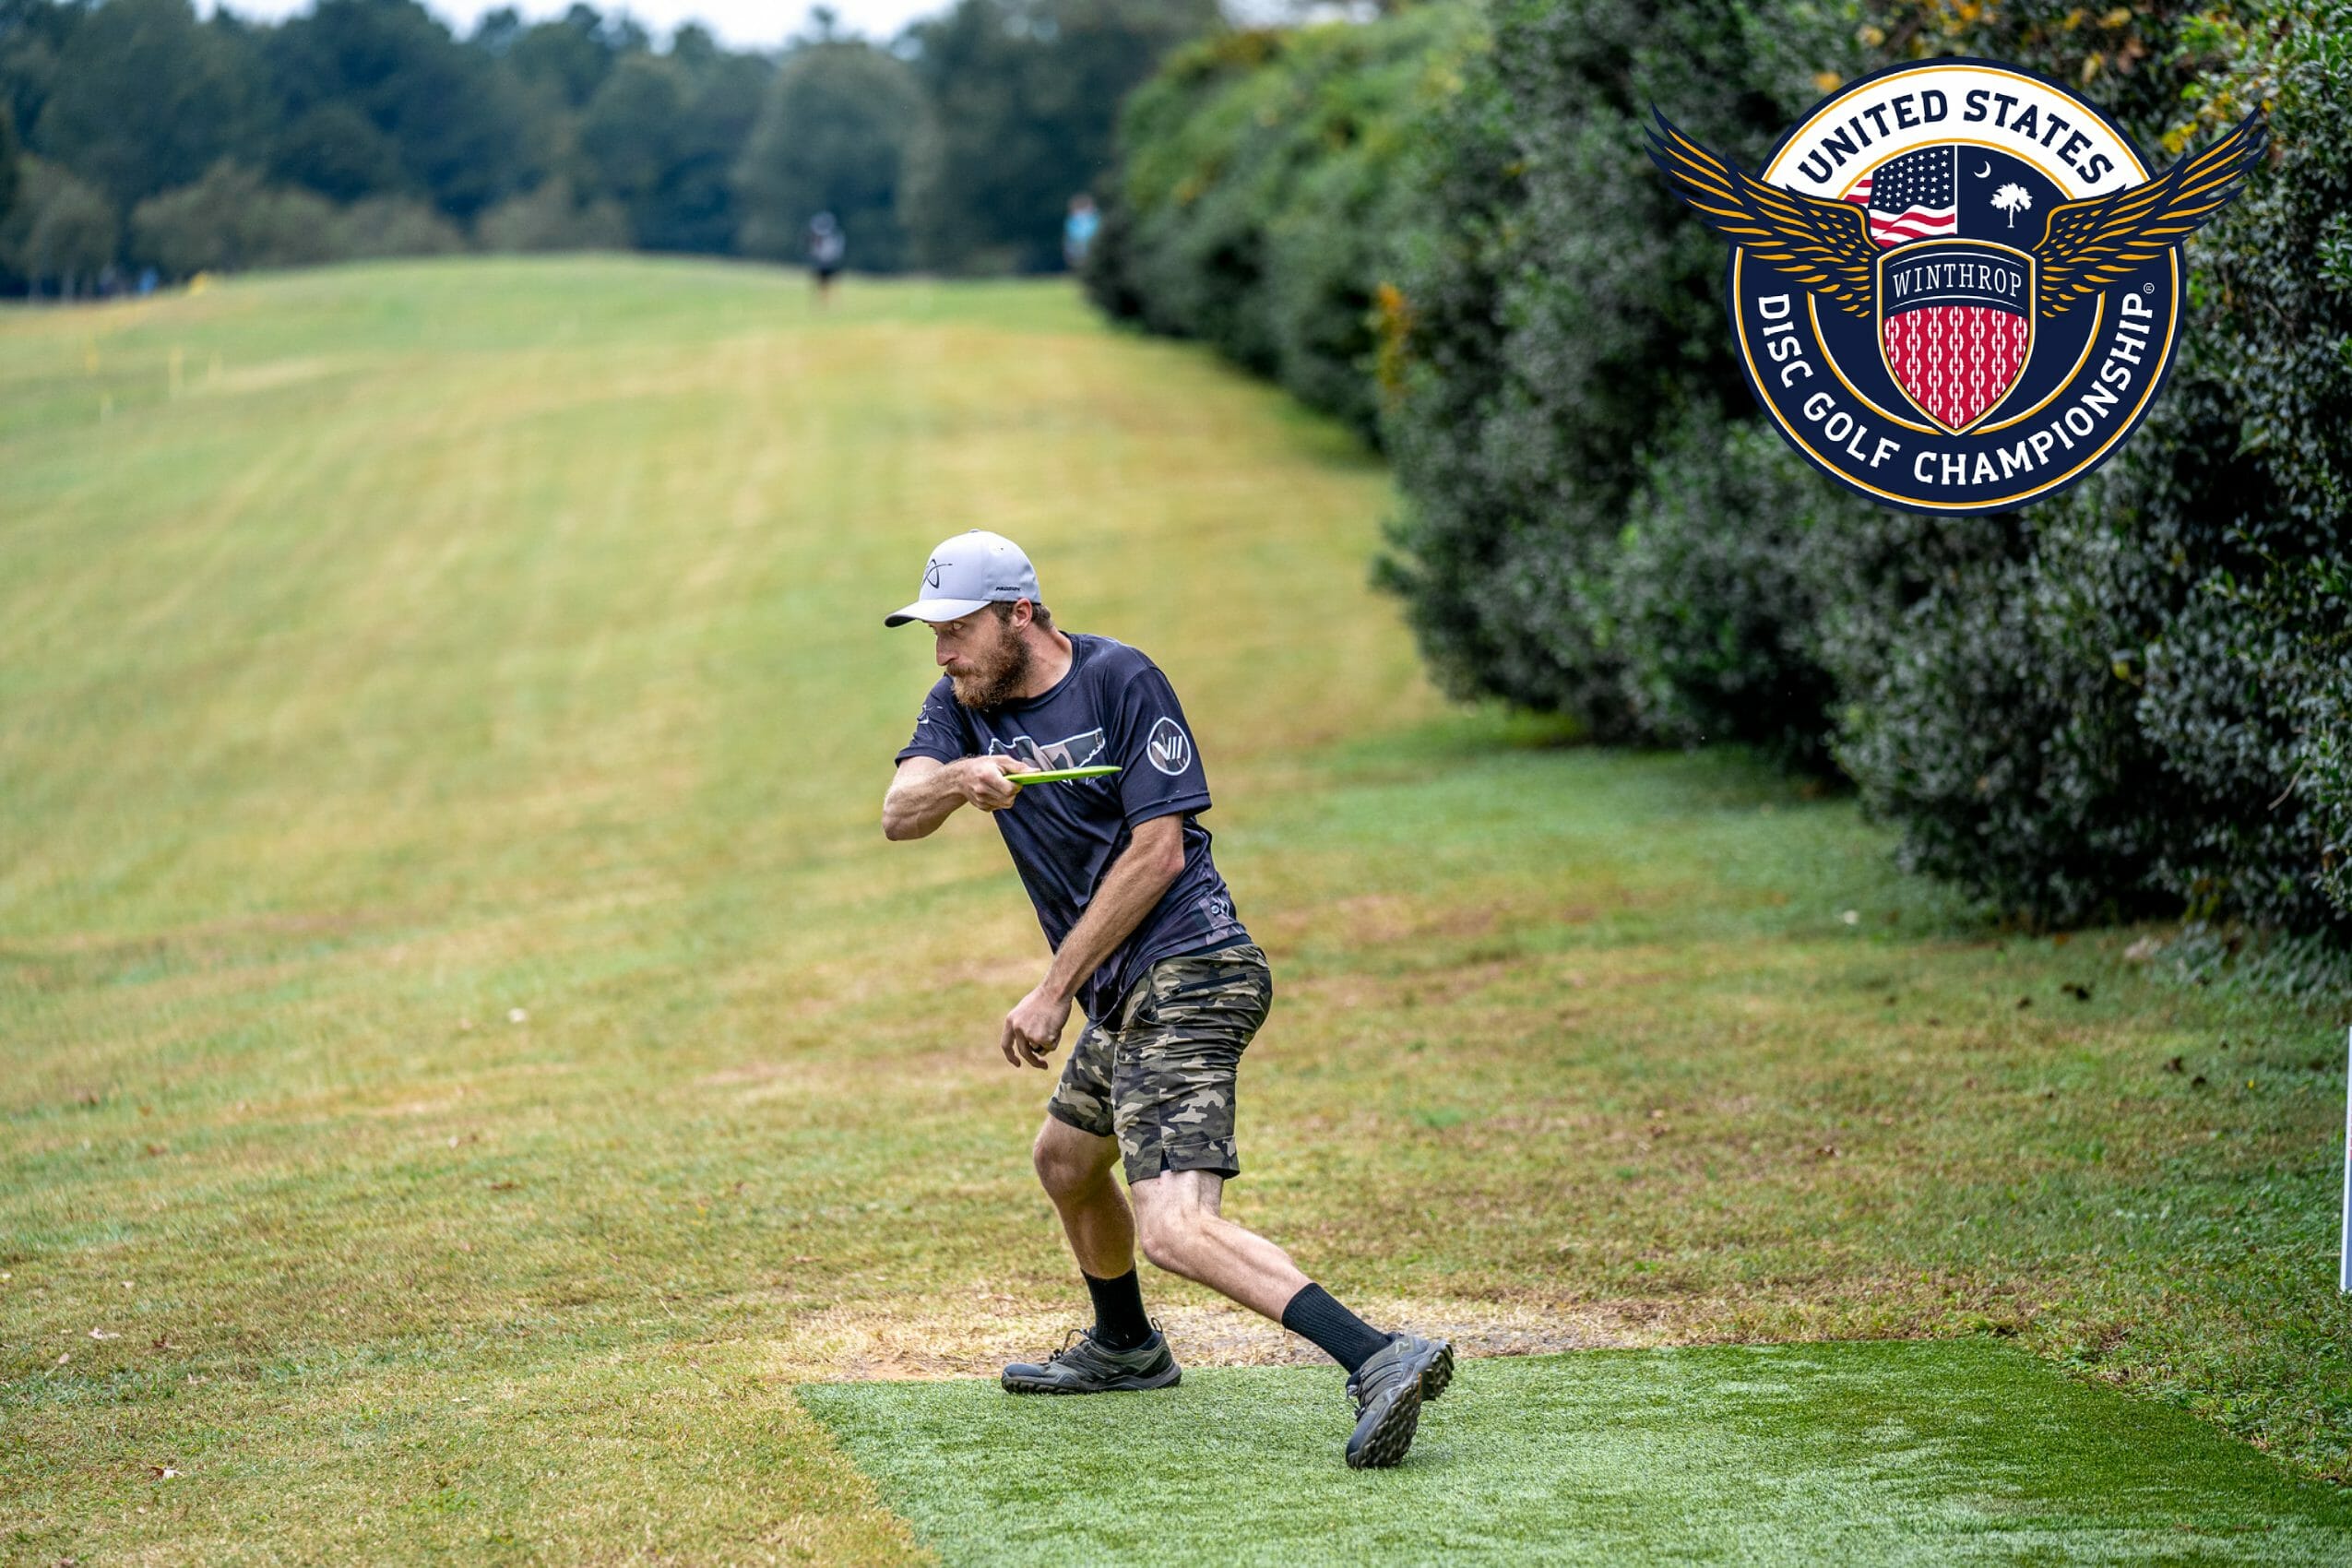 USDGC: Dickerson Adds To Advantage With 18 To Play - Ultiworld Disc Golf.